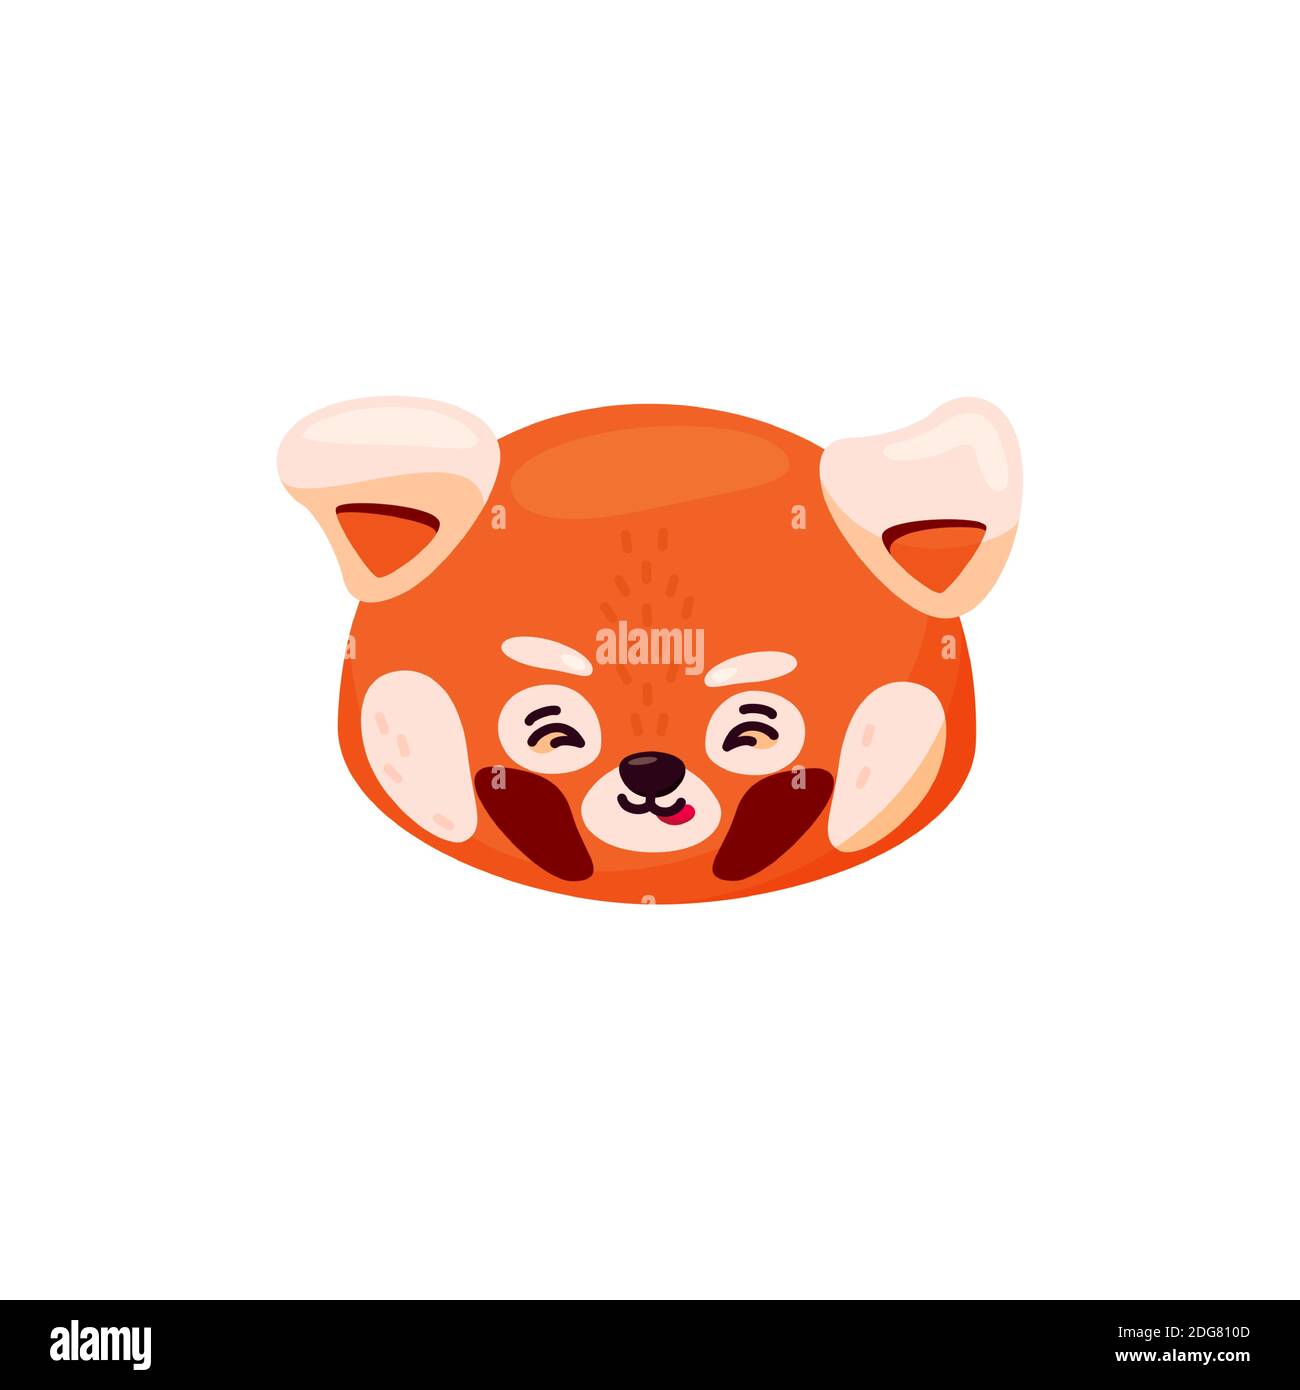 Red panda head as emoji. Naughty face expression. Vector illustration of smiley animal in cartoon style Stock Vector